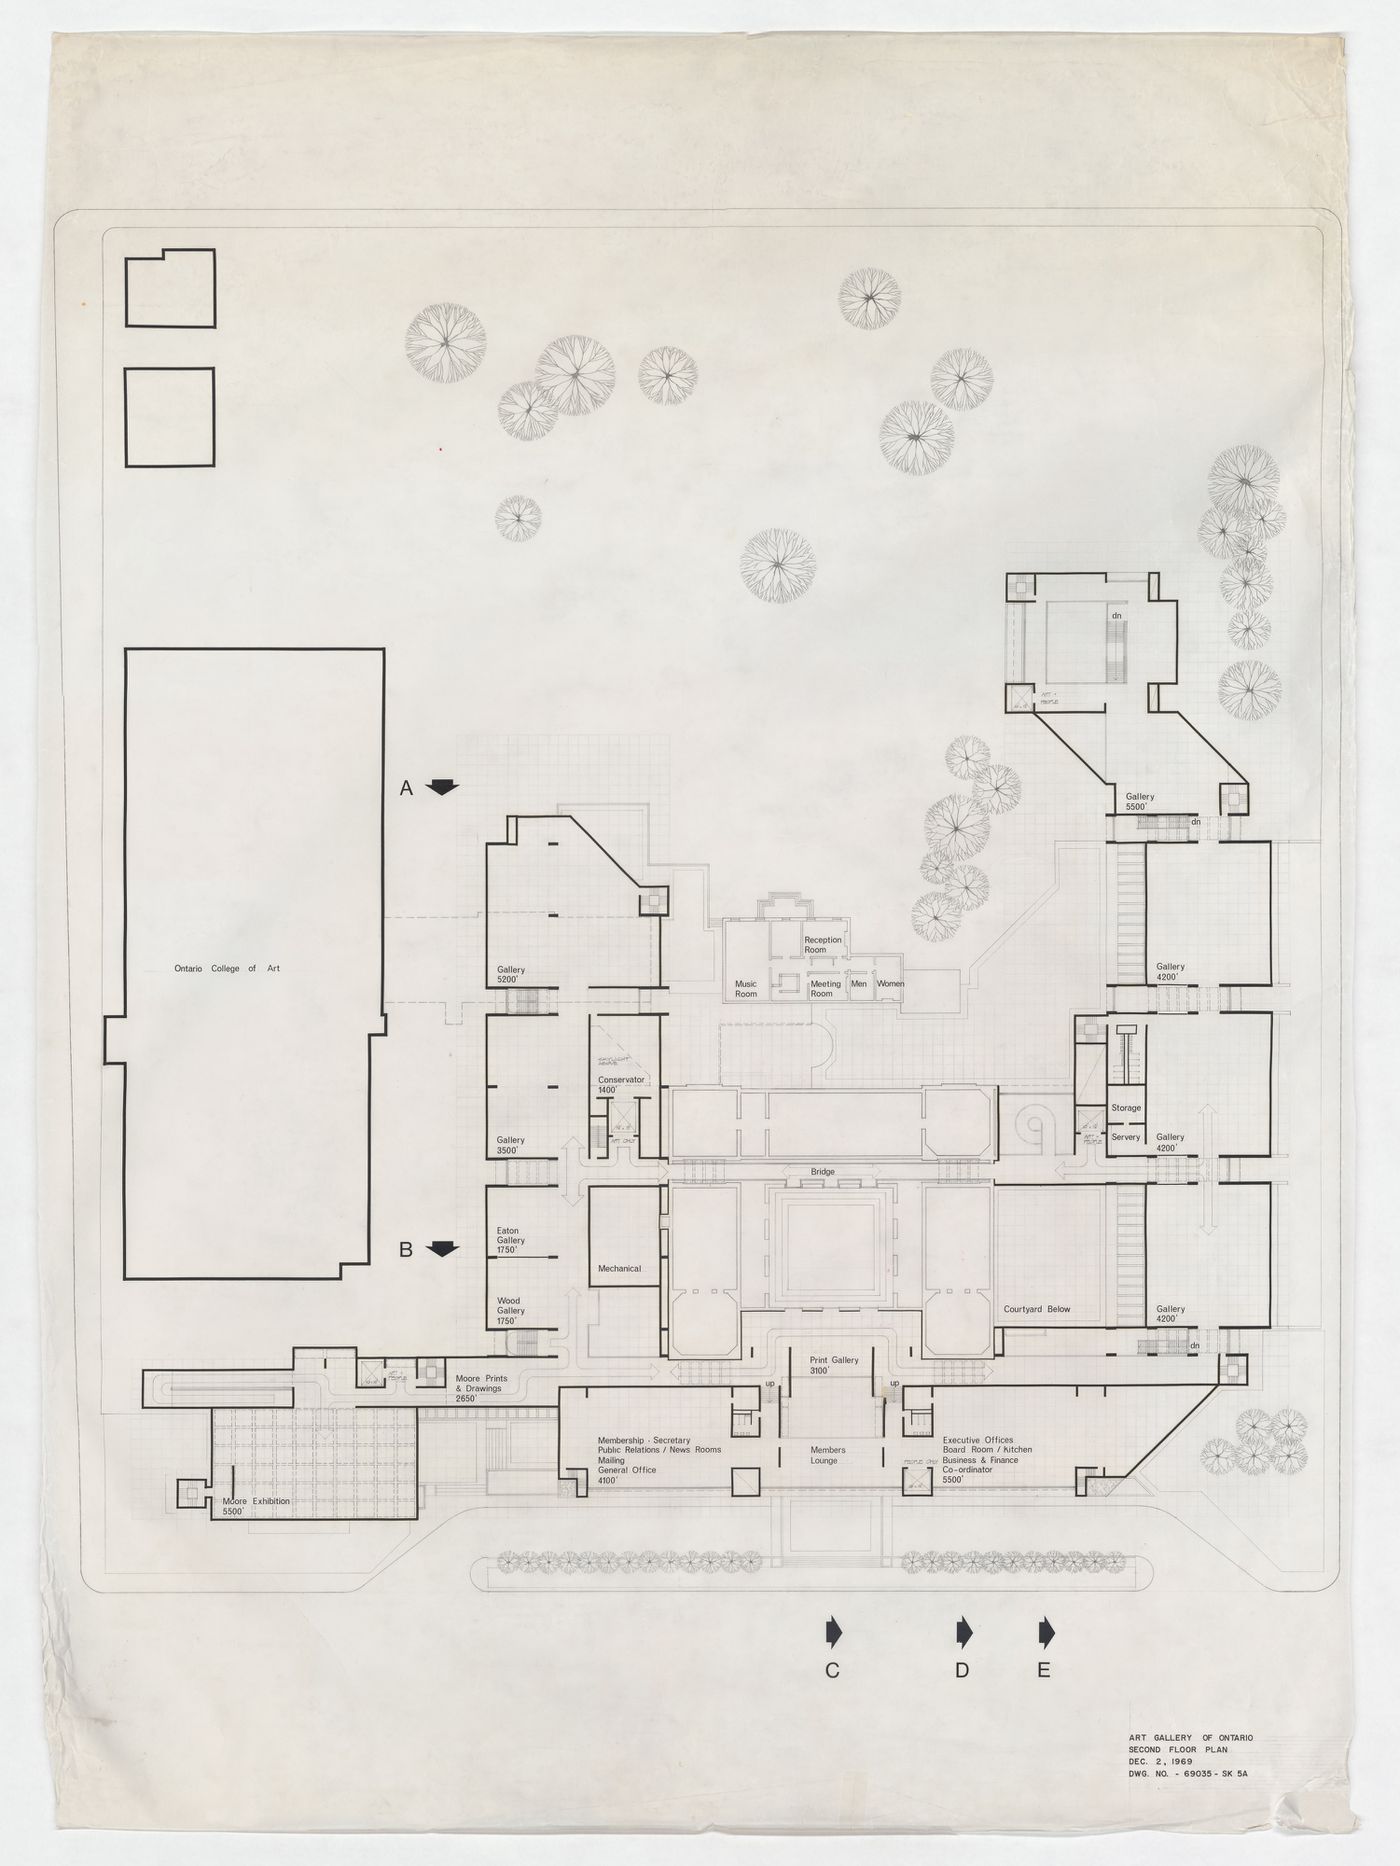 Second floor plan for Henry Moore Sculpture Centre, Art Gallery of Ontario, Stage I Expansion, Toronto